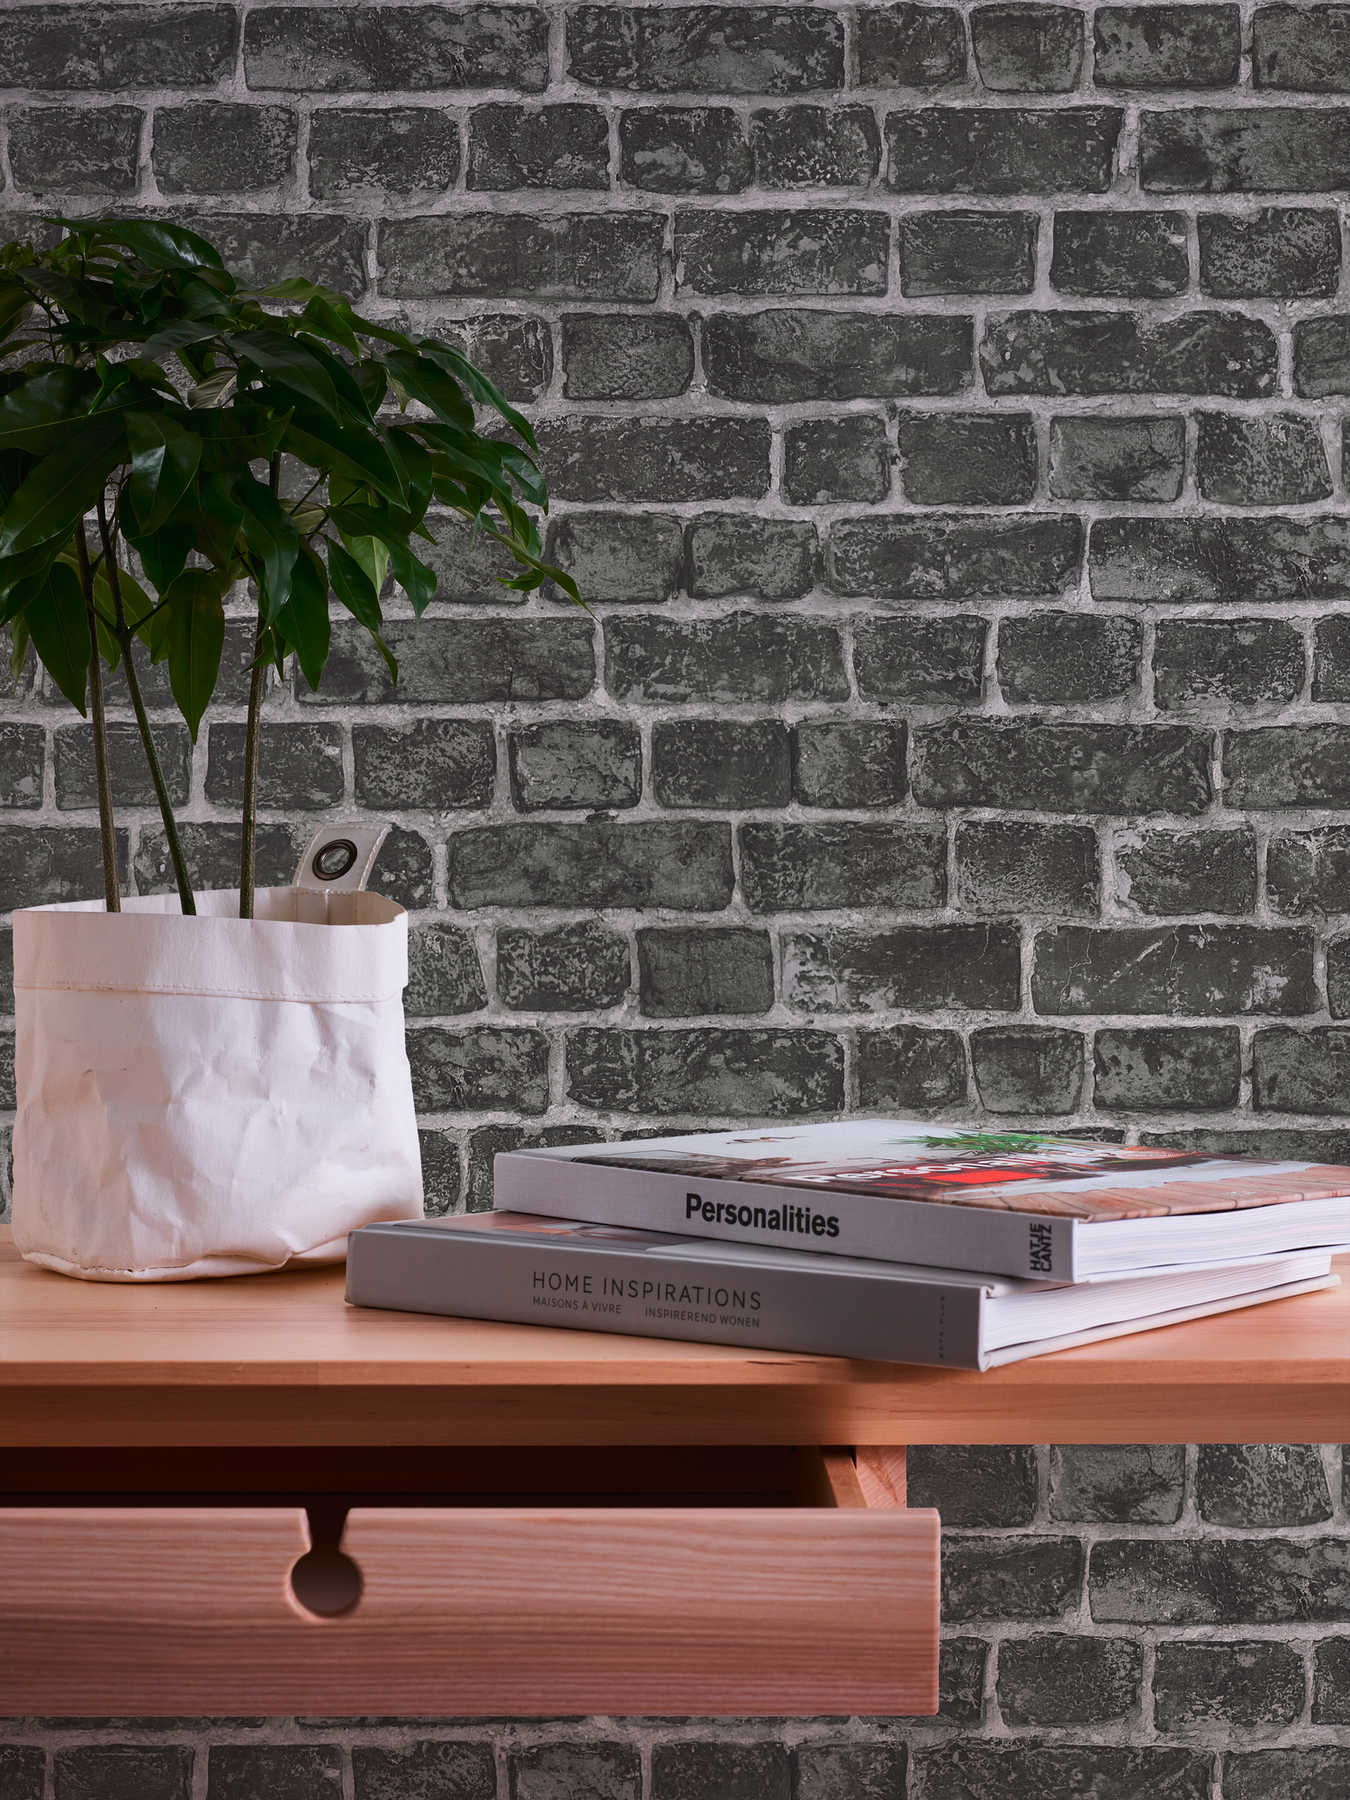             Nature stone wall wallpaper with dark grey bricks and light joints - black, grey
        